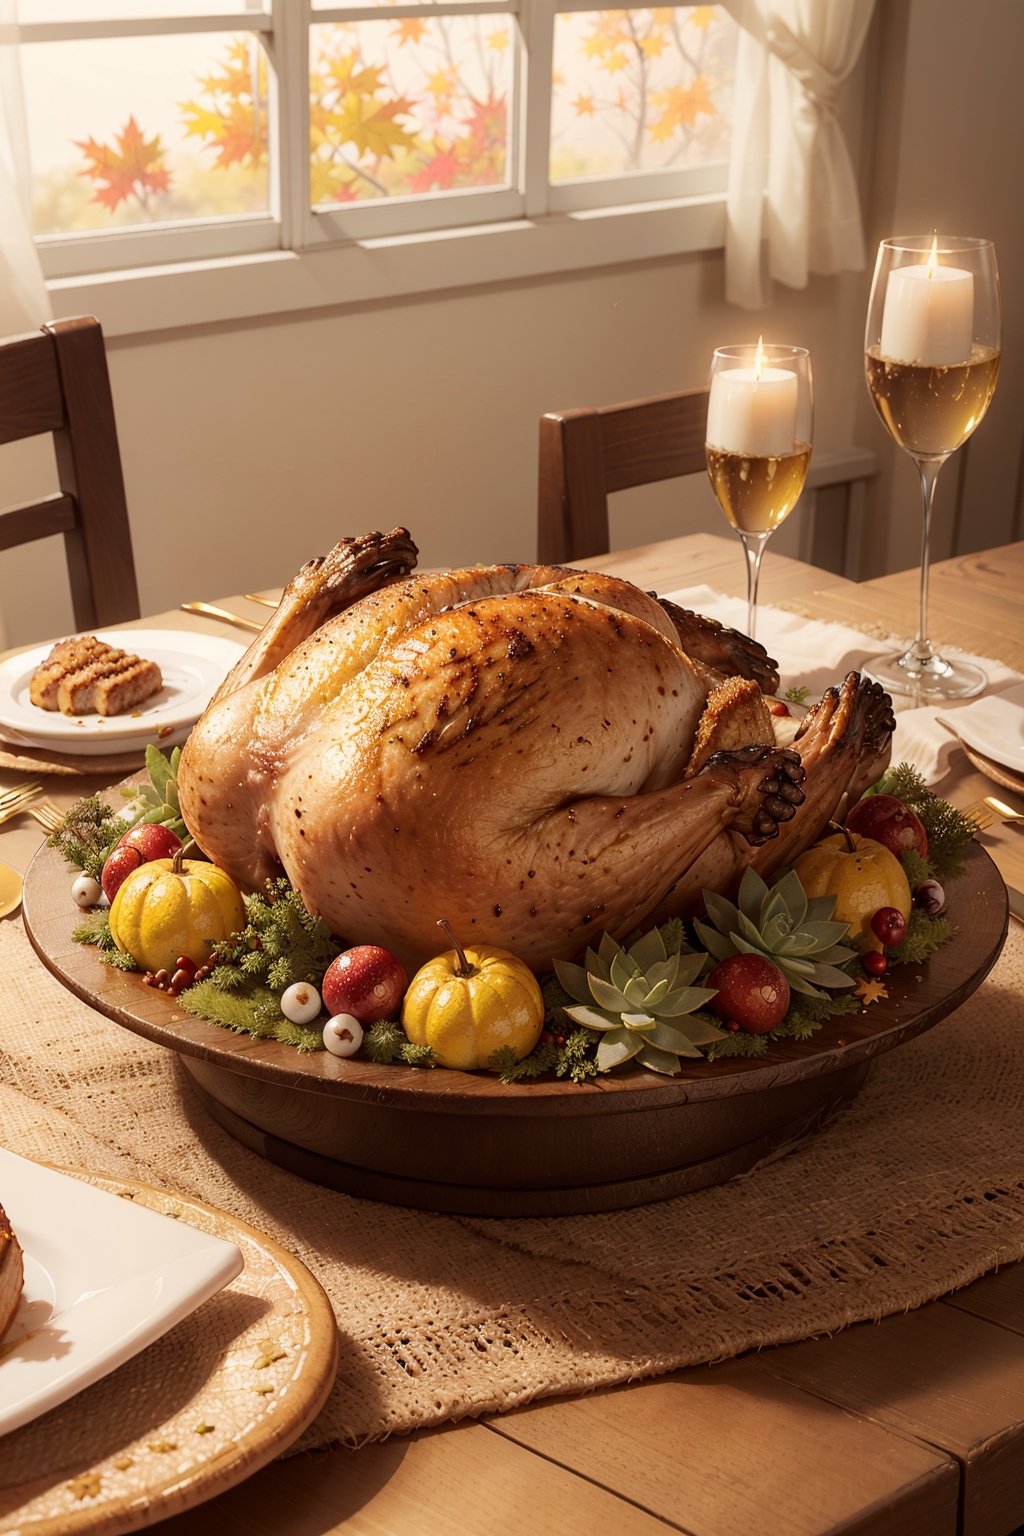 (prompt)
(masterpiece:1.4), (extremely detailed CG:1.4), (best quality:1.4), (illustration), sfw, pov, close up, (perfect lighting:1.3), Thanksgiving turkey, (juicy_roasted:1.2), (golden_brown:1.2), (mouthwatering:1.2), (succulent_meat:1.2), (crispy_skin:1.2), (traditional_feast:1.2), (festive_table:1.2), (bountiful_spread:1.1), (garnished_with_herbs:1.2), (autumn_decor:1.2), (family_gatherings:1.2), (grateful_celebration:1.3), (warm_ambience:1.2), (holiday_traditions:1.2), (aromatic_scent:1.2), (mouthwatering_delight:1.2), (celebration_of_abundance:1.3)